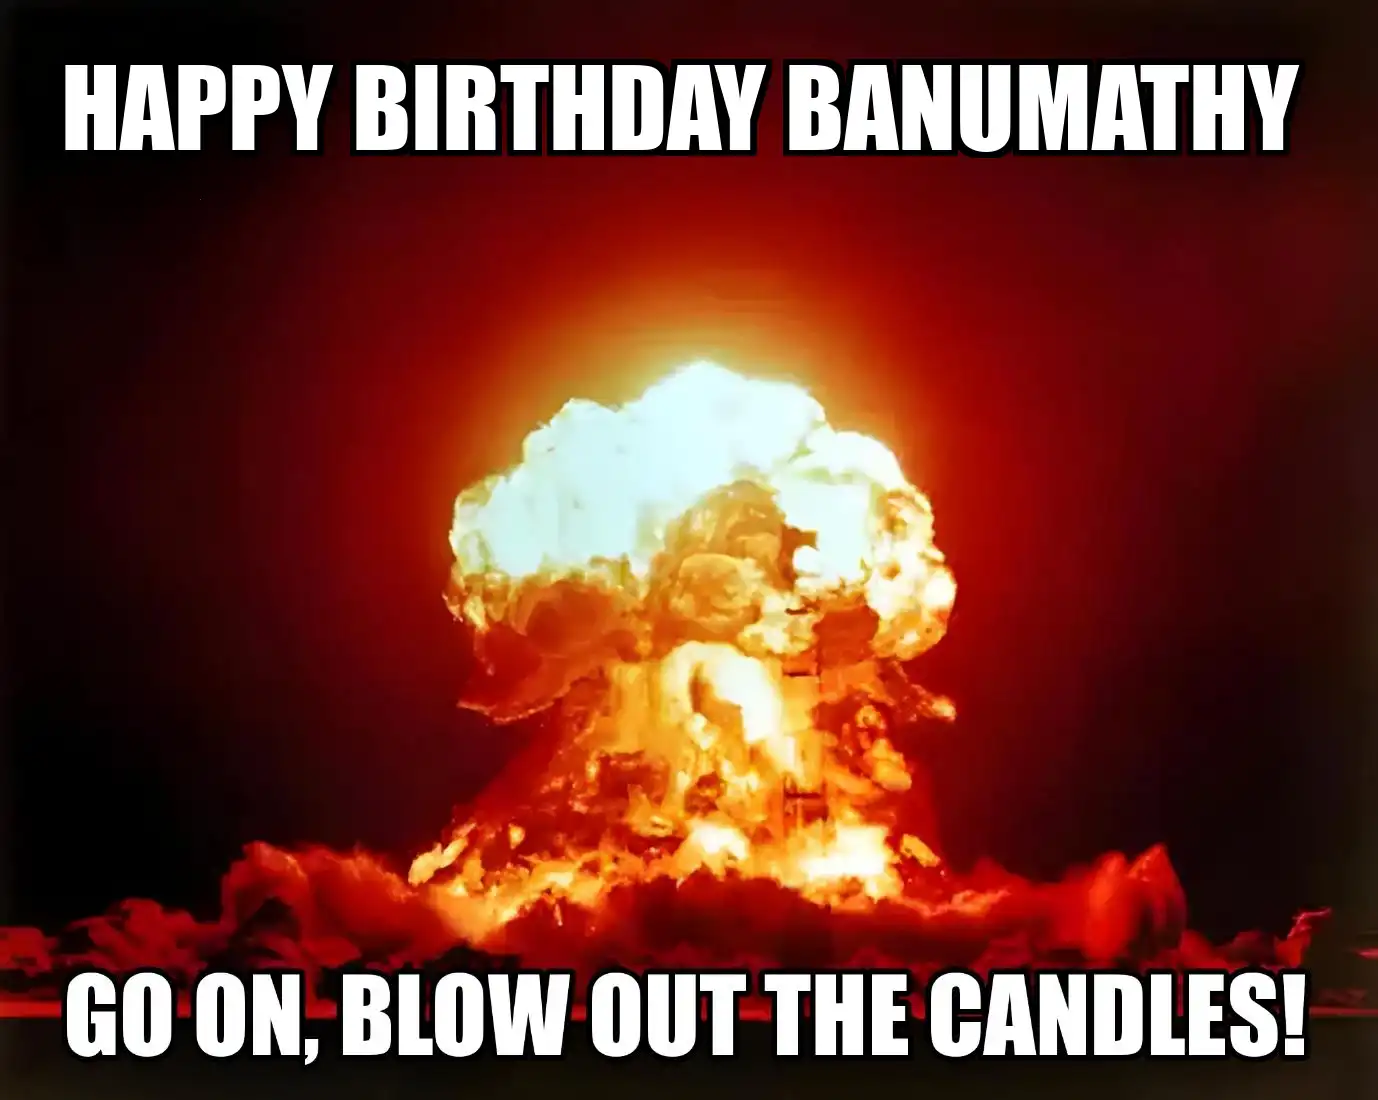 Happy Birthday Banumathy Go On Blow Out The Candles Meme